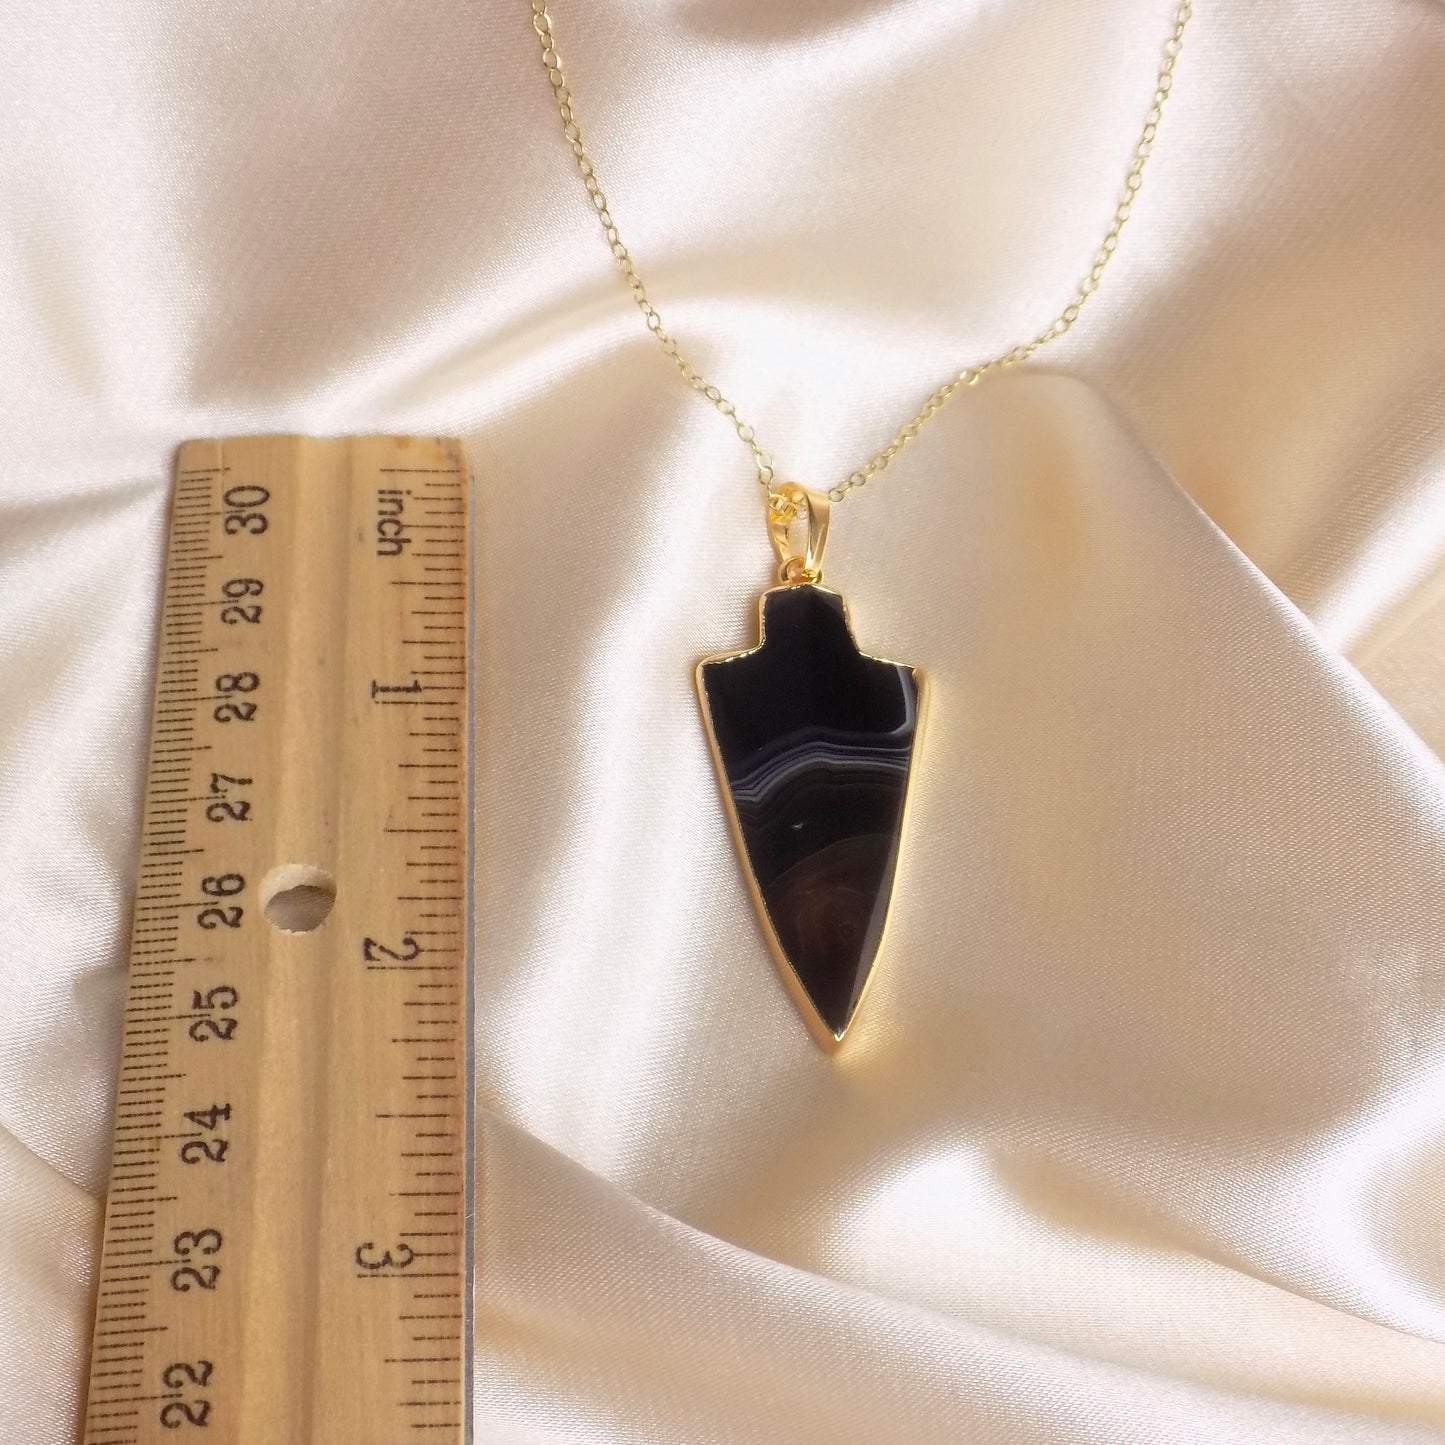 Black Agate Arrowhead Necklace Gold, Crystal Slice Pendant For Women, Gifts For Mom, M7-71